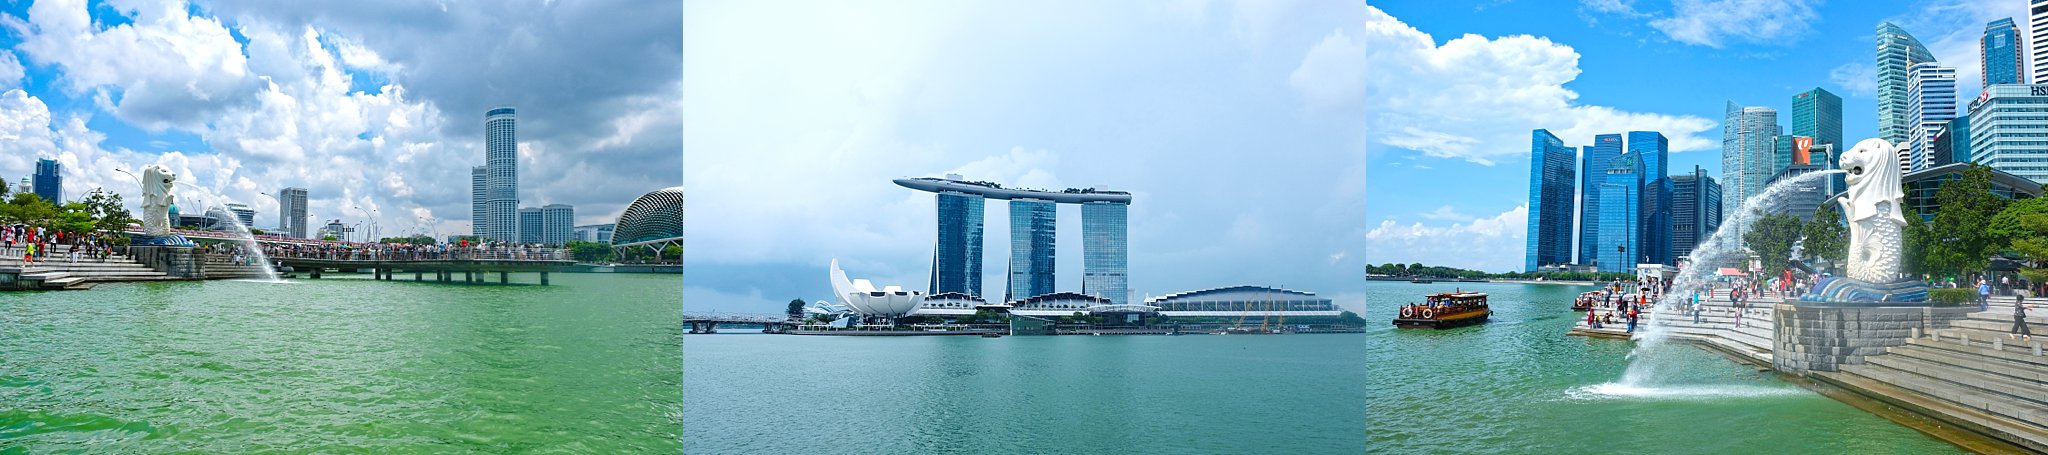 The Merlion and a view of the Marina Bay Sands Hotel, taken from the Bumboat (taken with Fujifilm XT2)